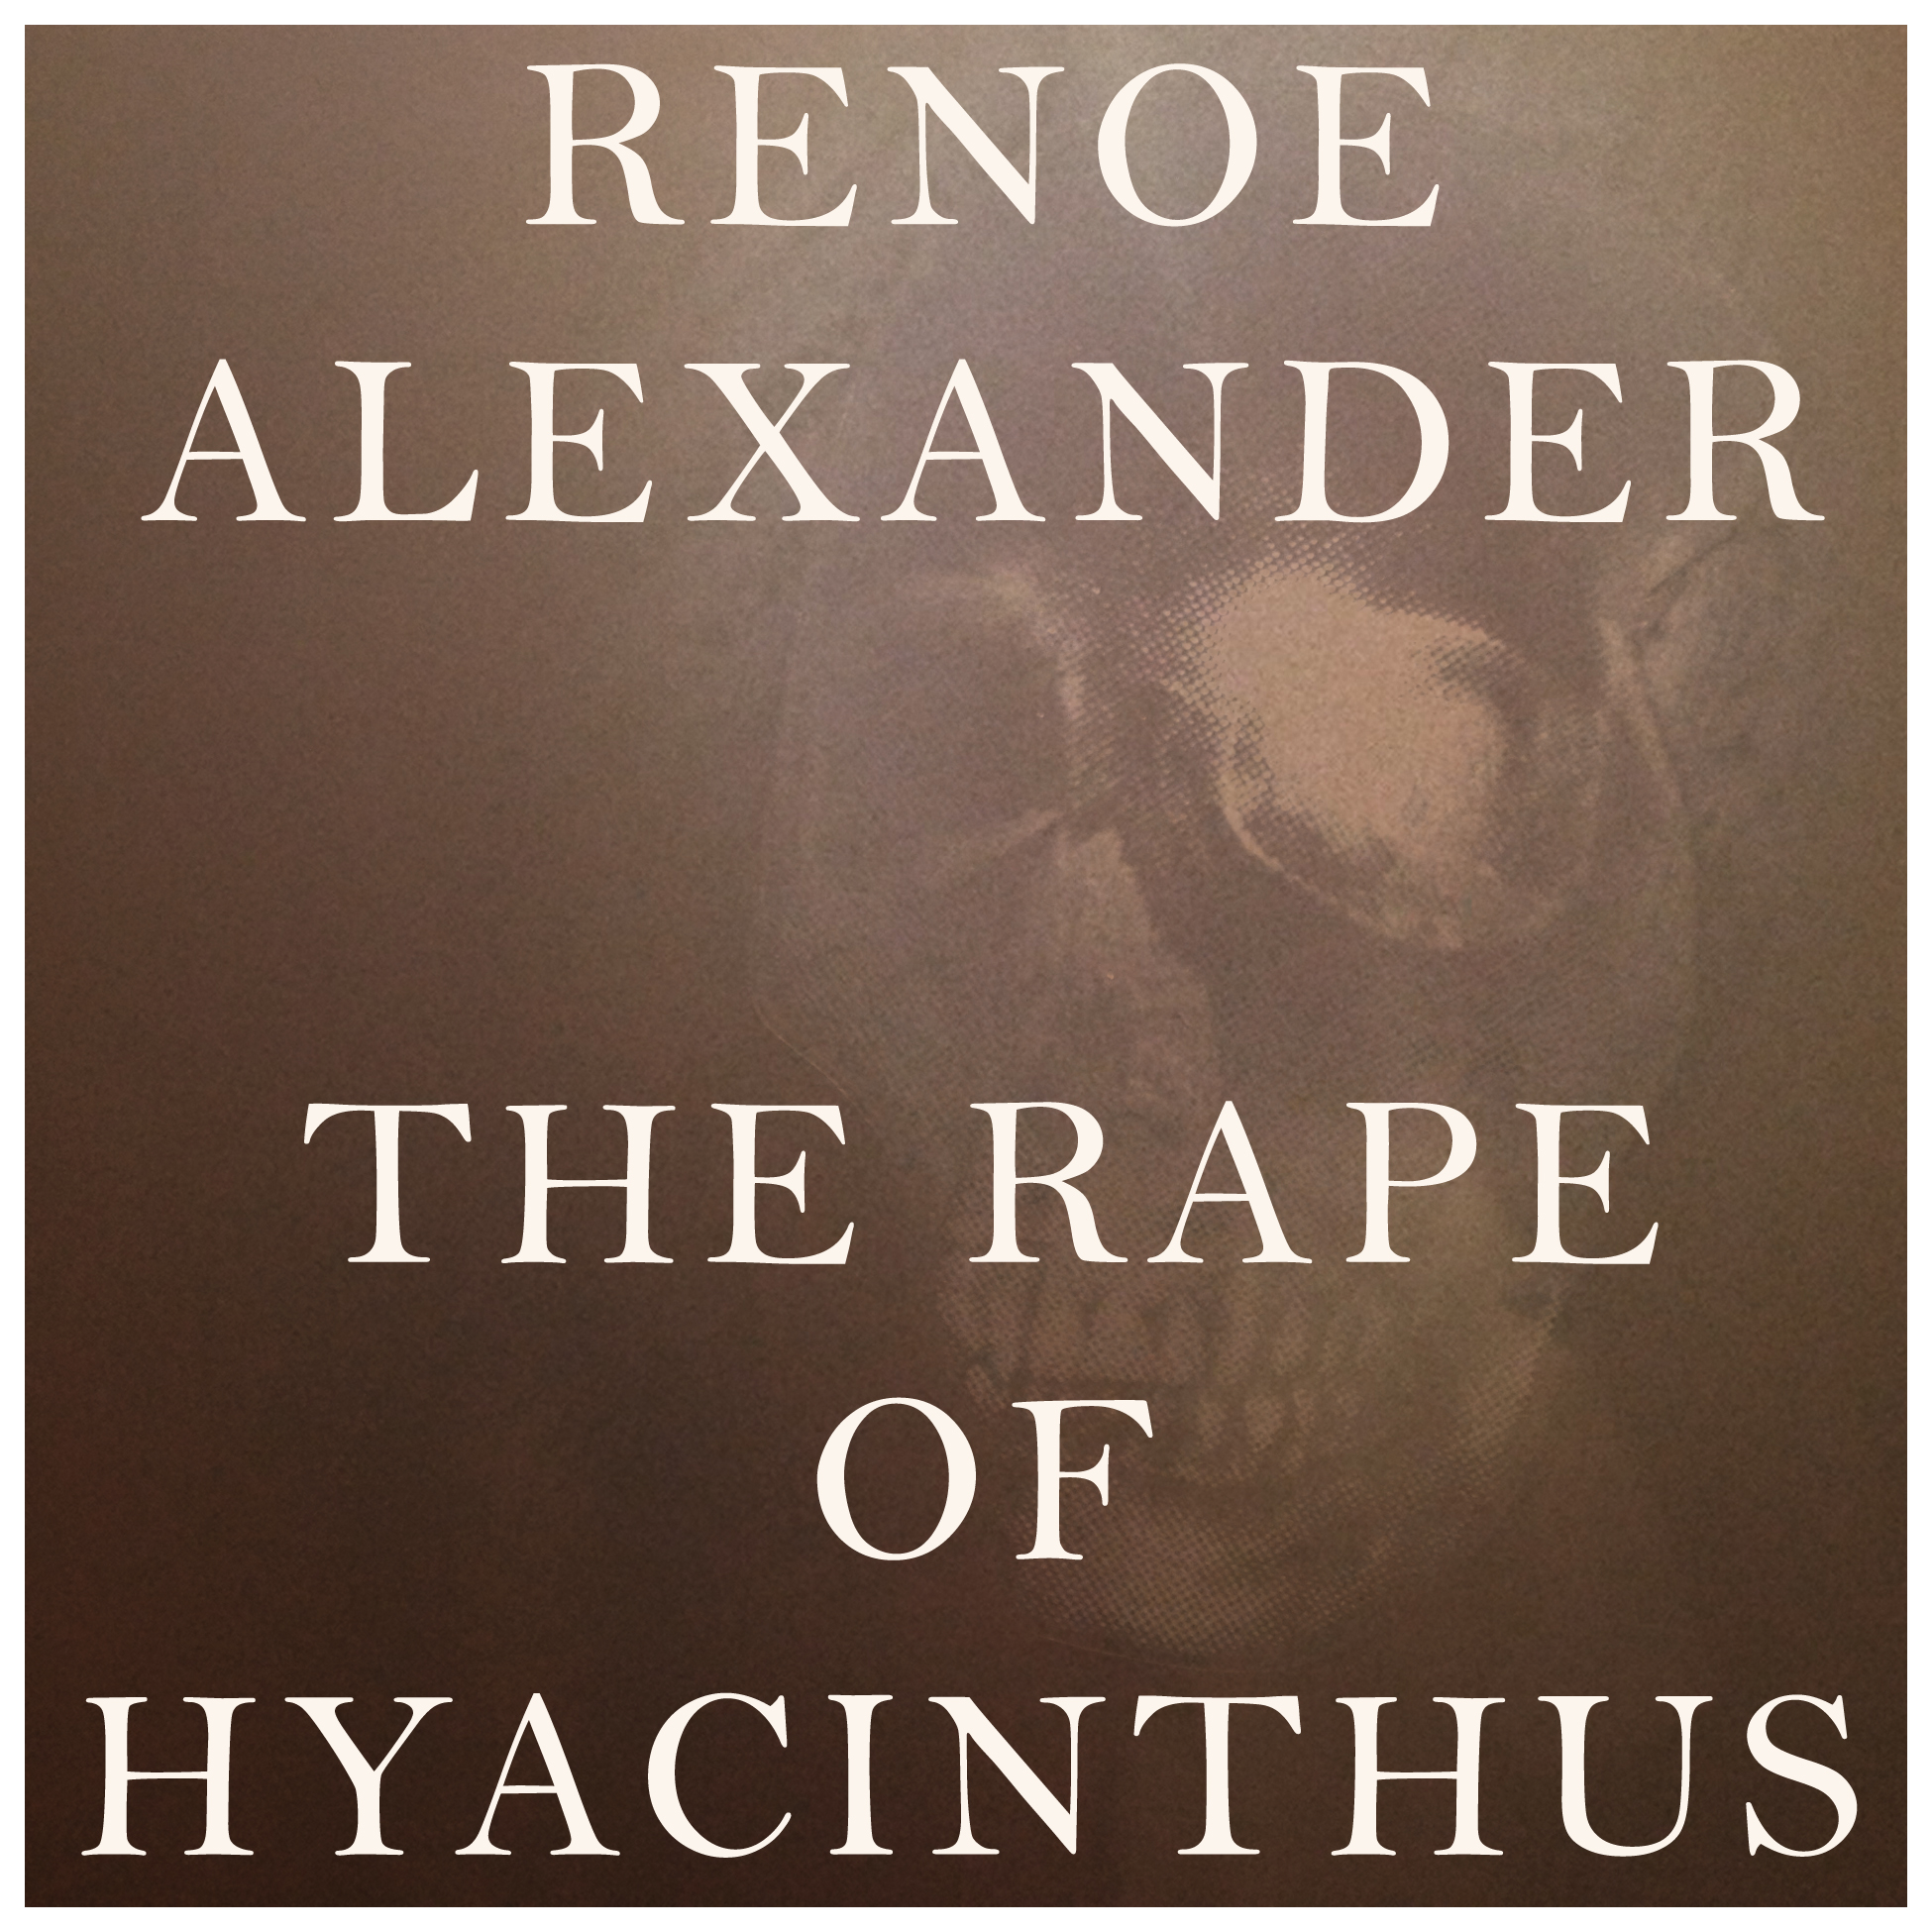 News Added Jul 23, 2012 The upcoming album from independent Portland, OR singer/songwriter, Renoe Alexander is scheduled for release on August 14, 2012. The album sampler released on Renoe Alexander's official YouTube channel previews a new sound for the band. Up until this point, most of the music has been simple piano/vocal ballads. The sampler […]